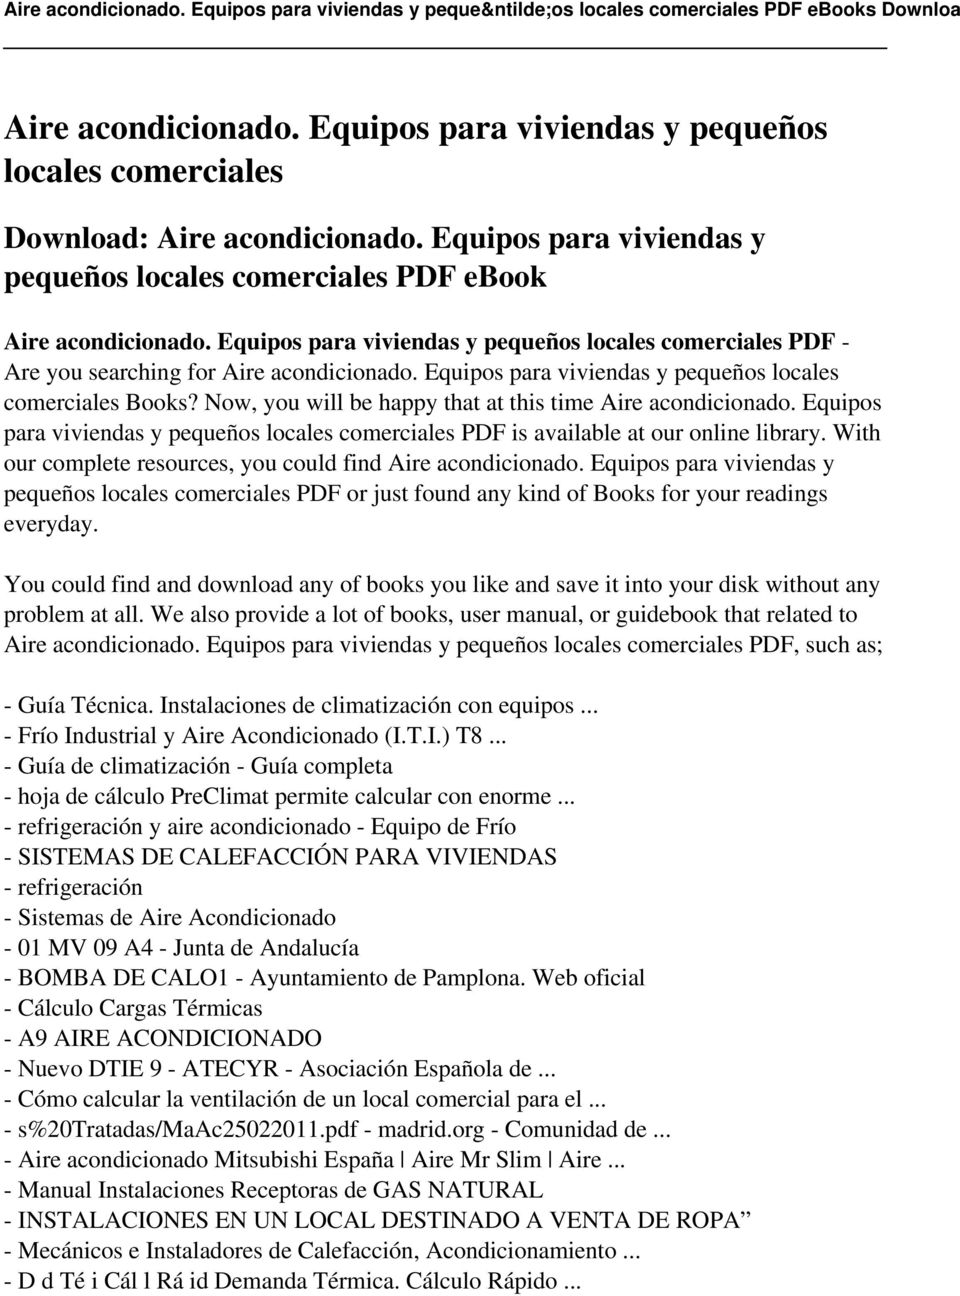 Now, you will be happy that at this time Aire acondicionado. Equipos para viviendas y pequeños locales comerciales PDF is available at our online library.